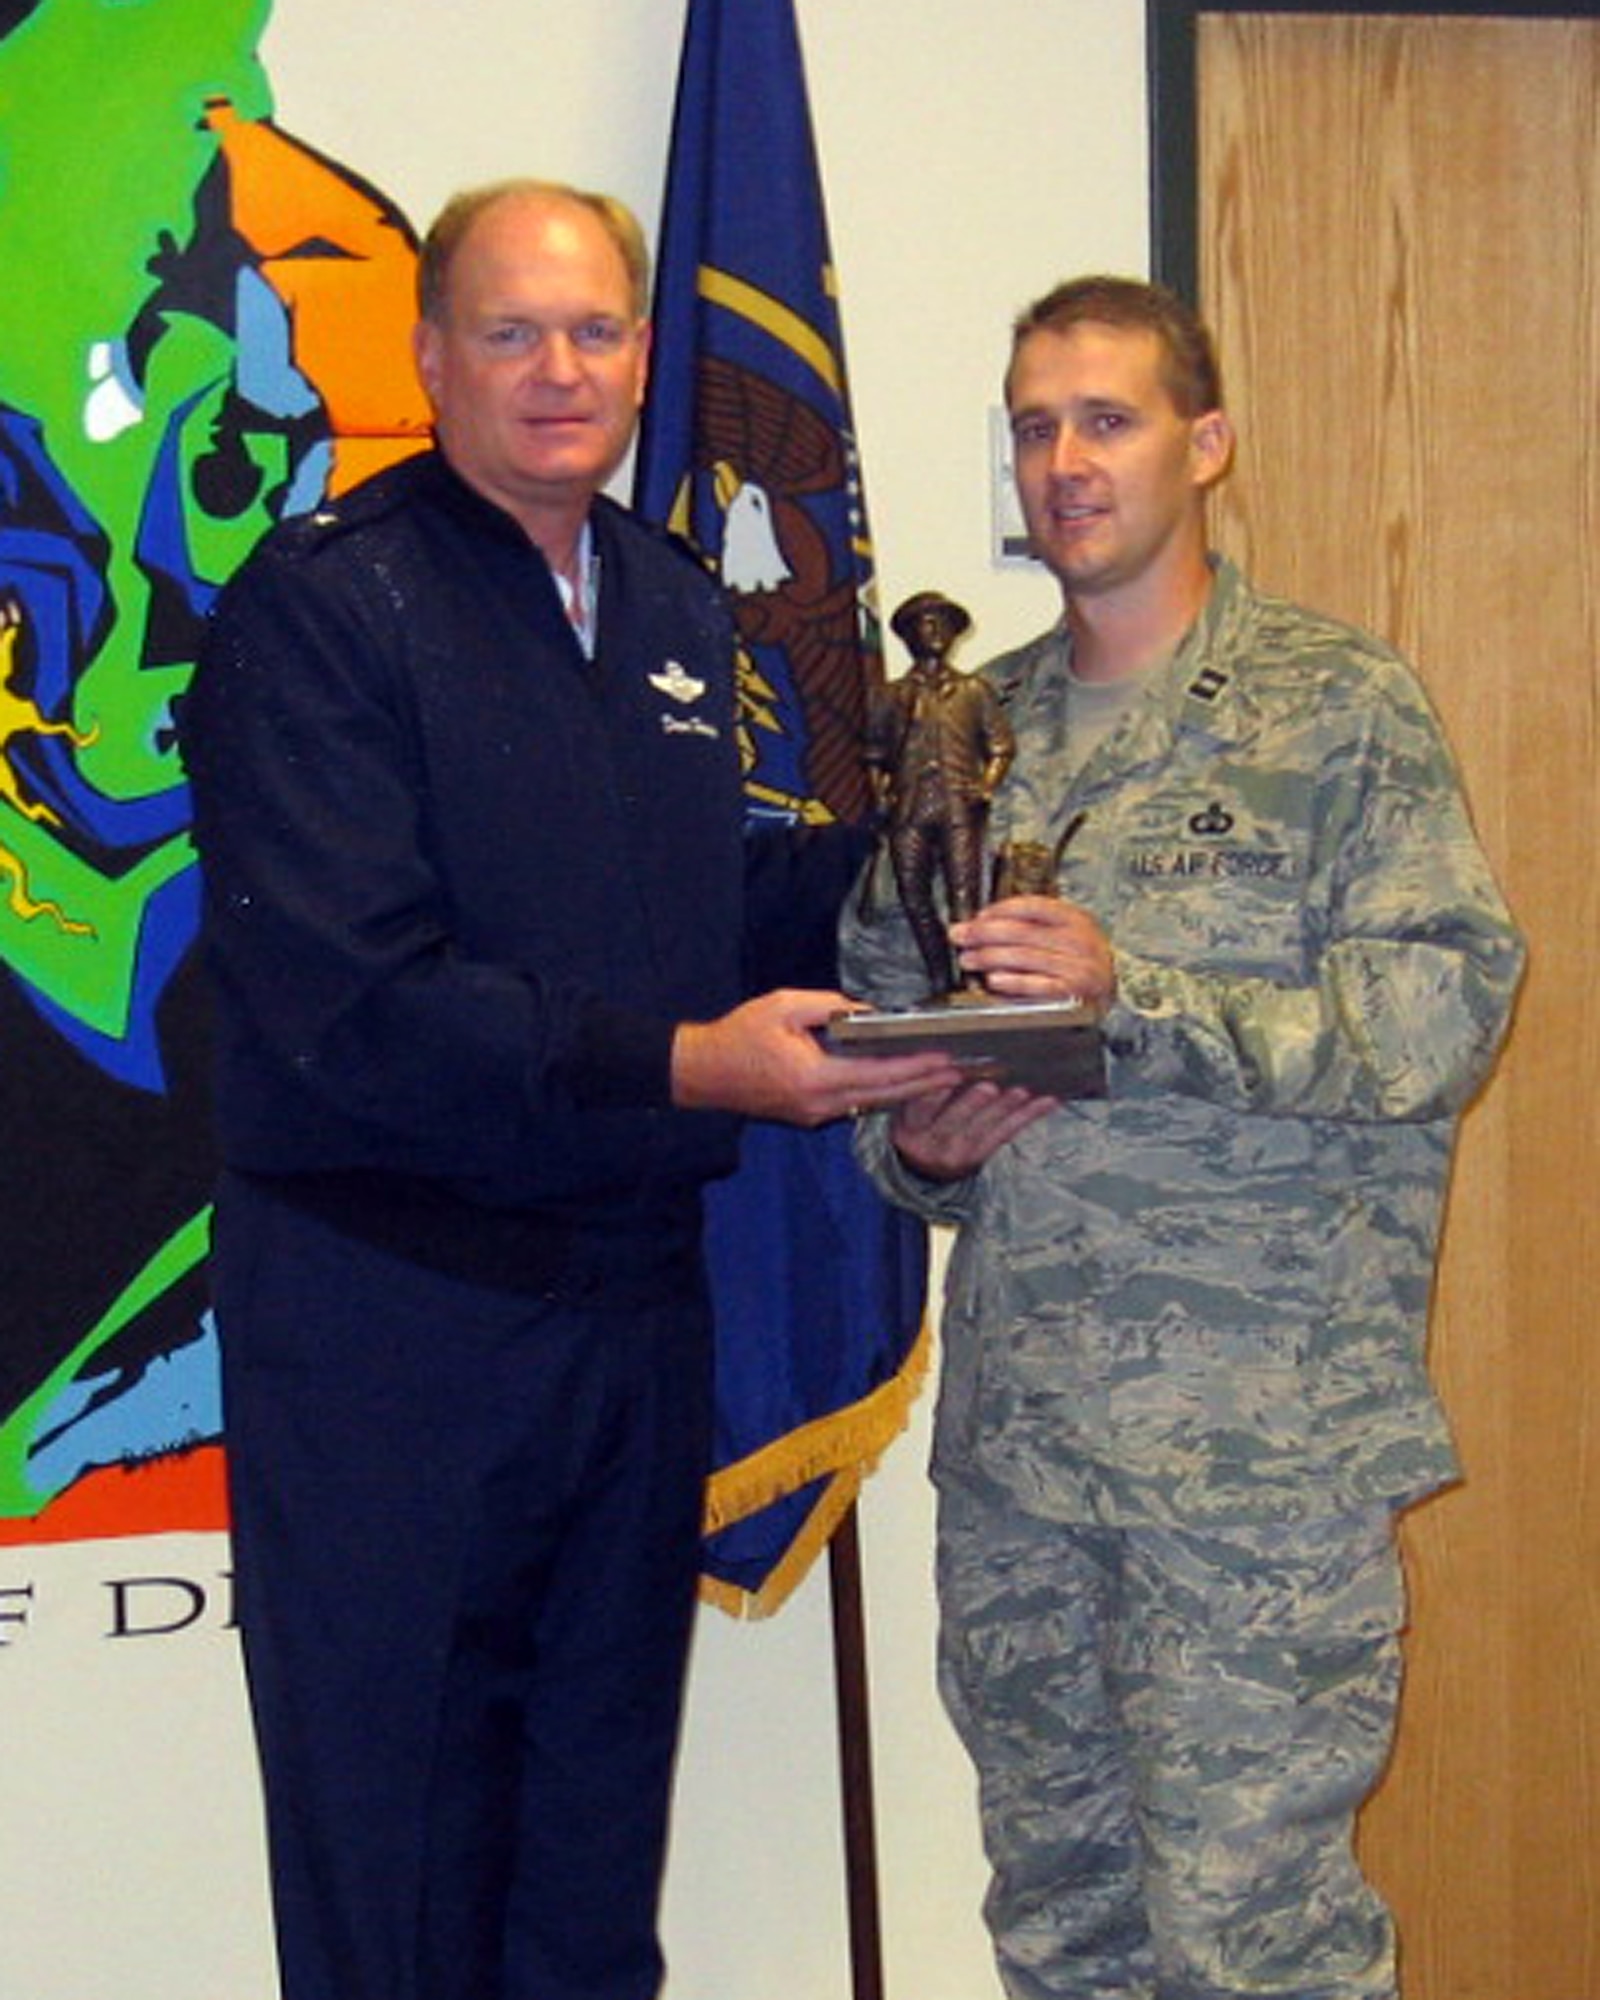 Capt. Todd Lobato, 299th Range Control Squadron, Air Traffic Control Training chief, receives the Outstanding Safety Achievement Award for the Air National Guard from Brig. Gen. David Hooper, Assistant Adjutant General for Air, Utah ANG, in October 2008.  